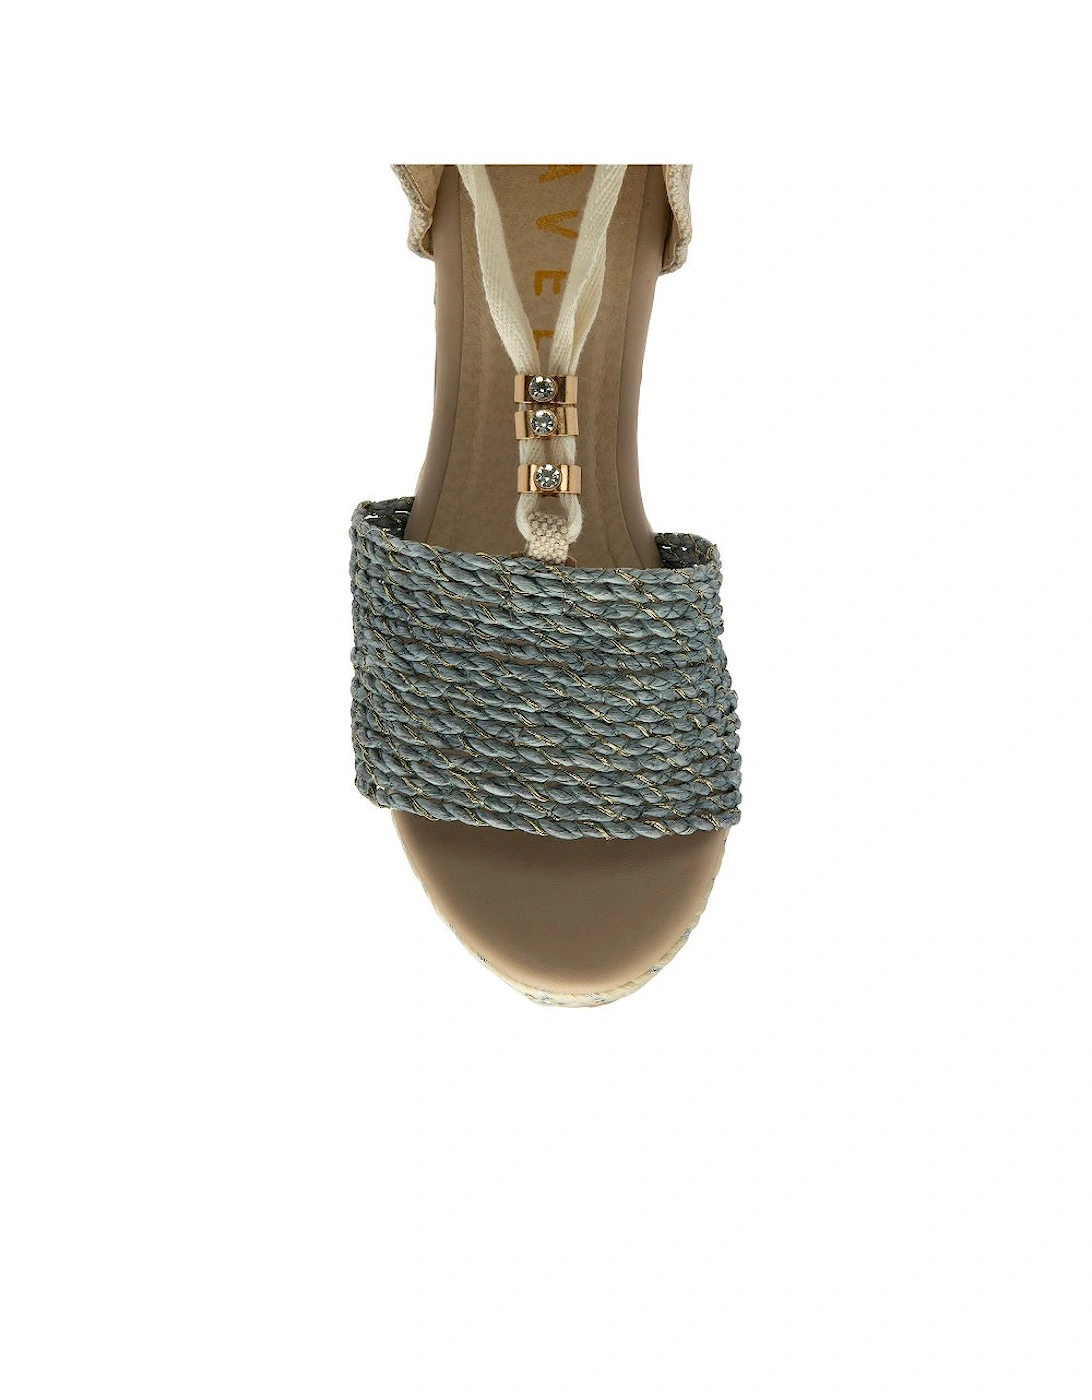 Forres Womens Espadrille Wedges